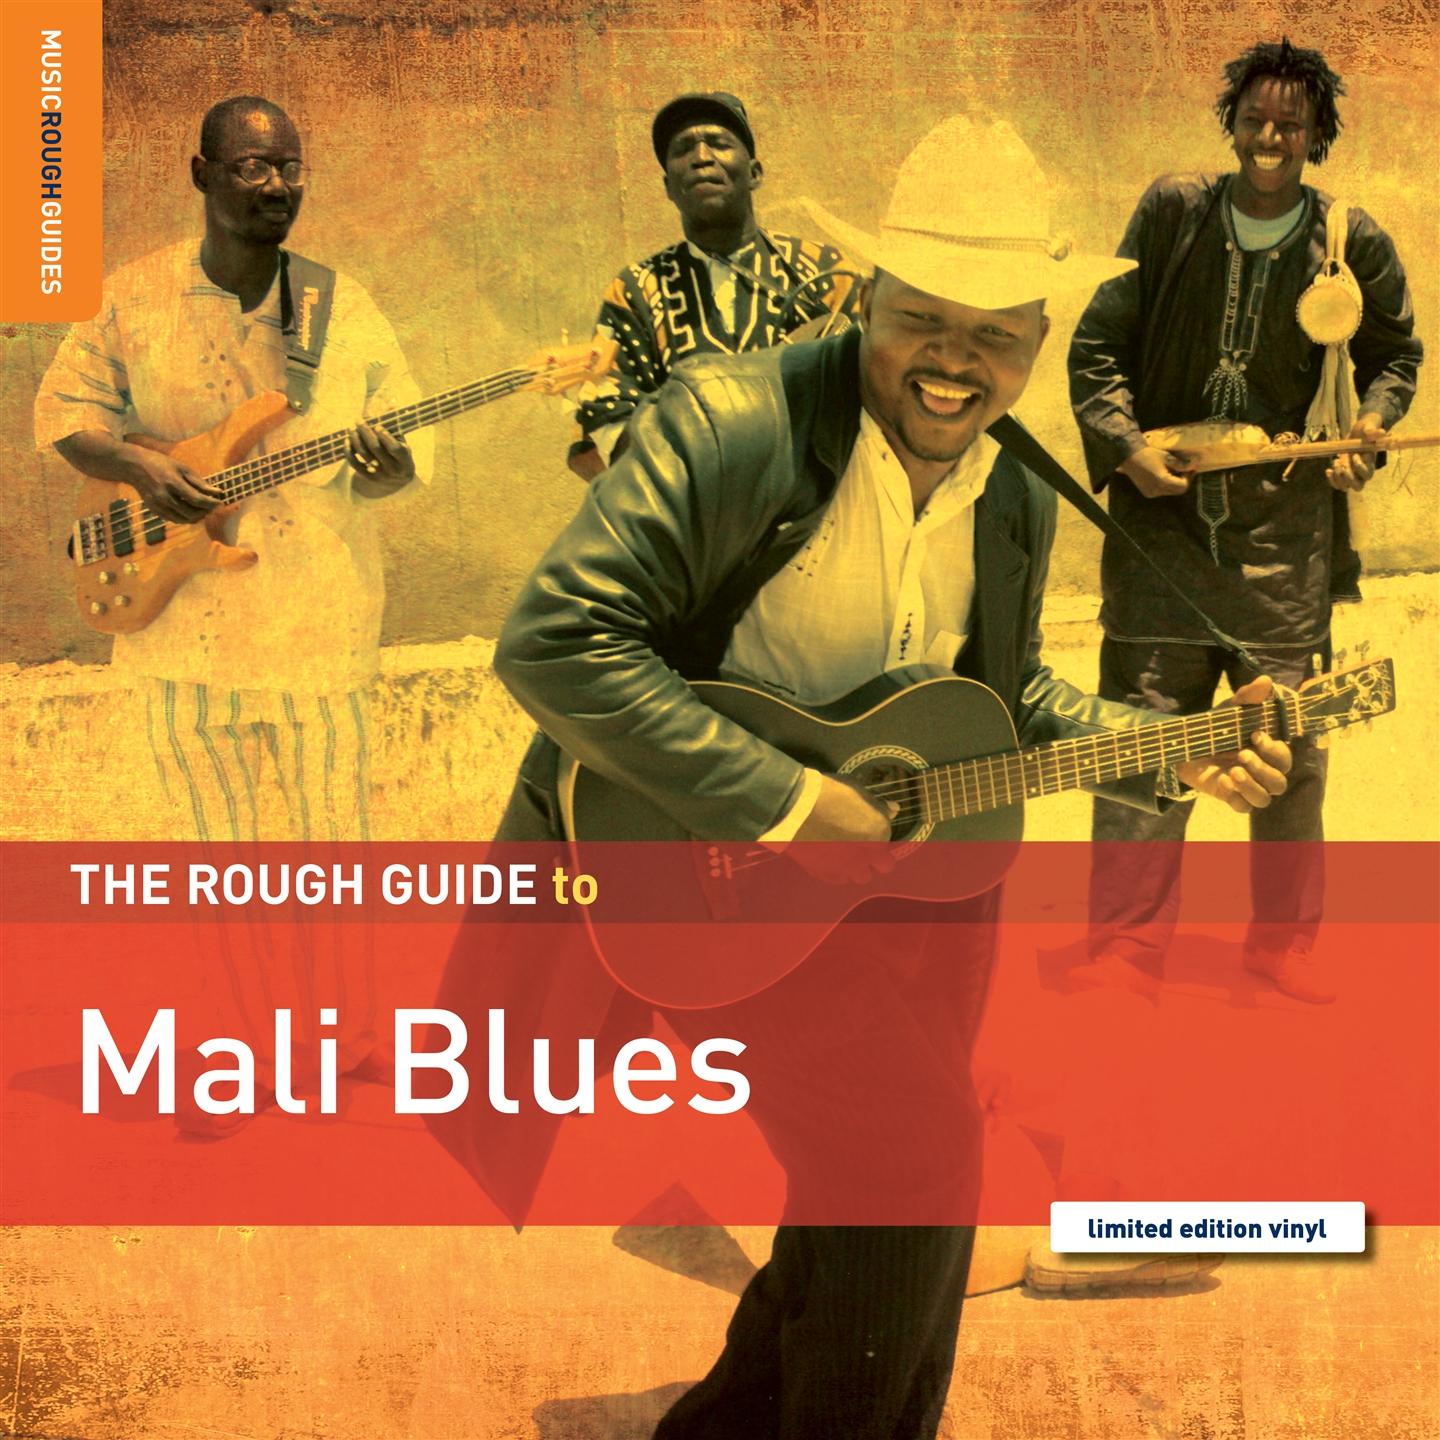 THE ROUGH GUIDE TO MALI BLUES [LP]